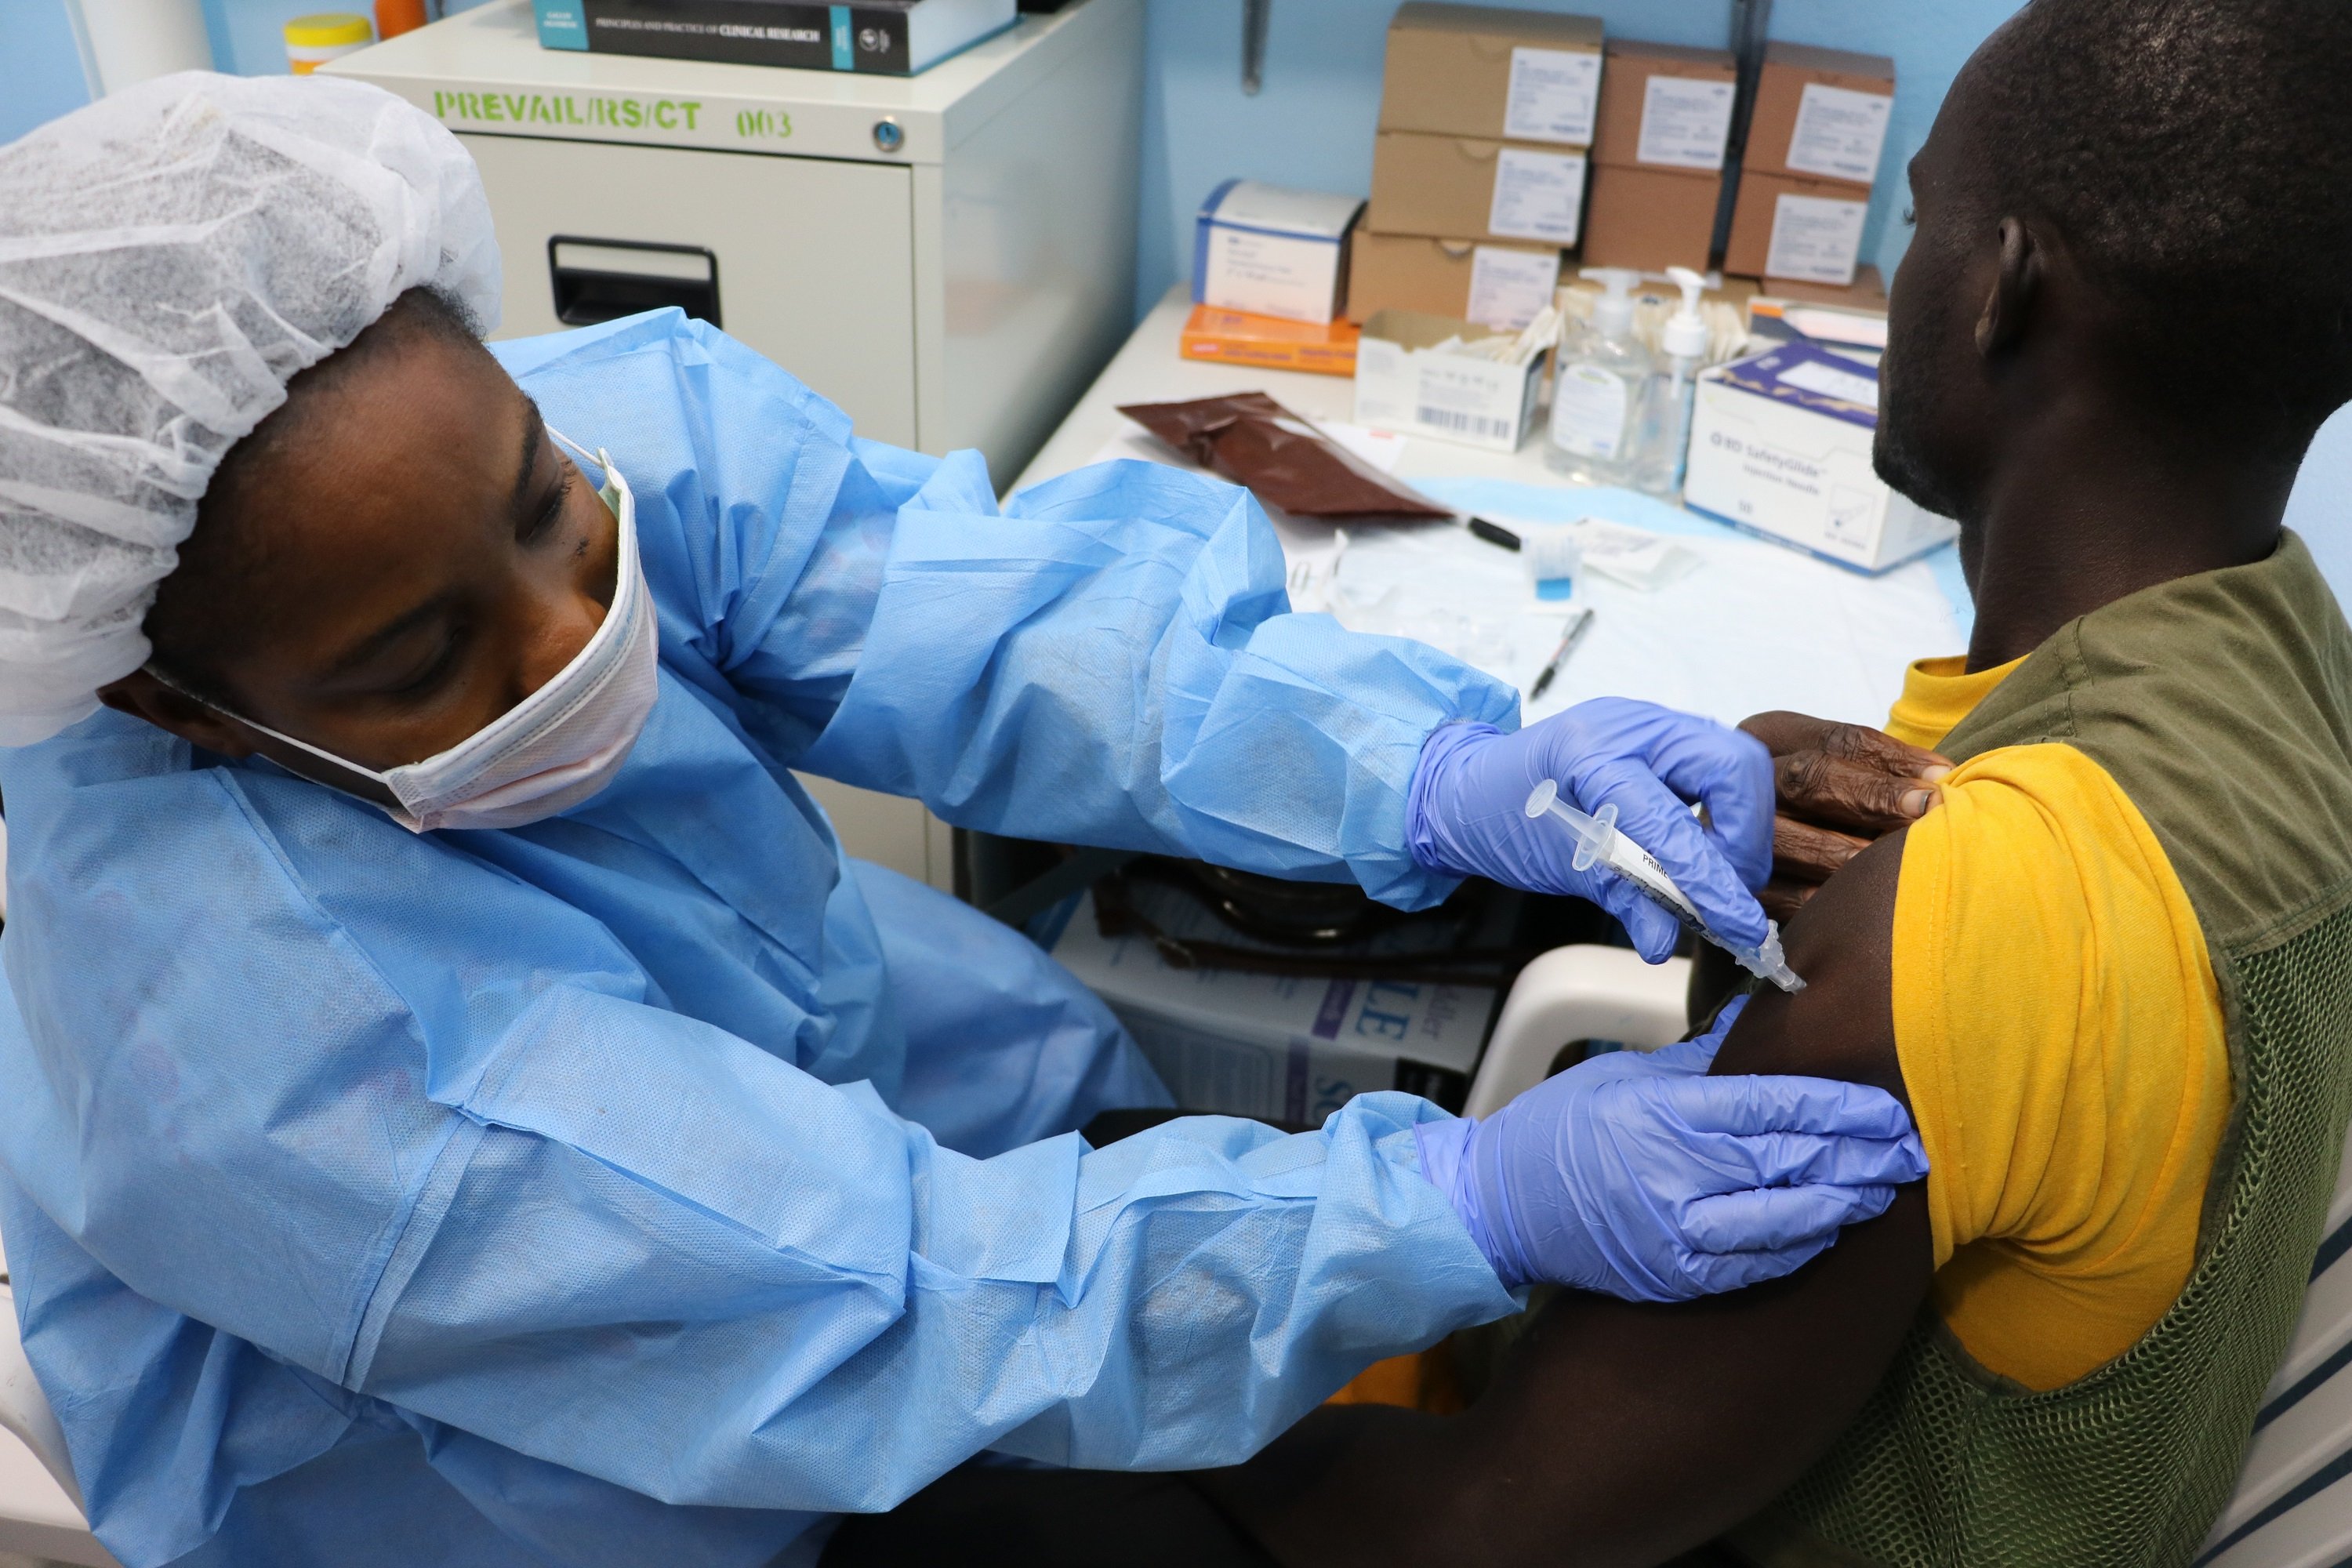 Preparations since the last Ebola outbreak in West Africa have improved the response this time around.